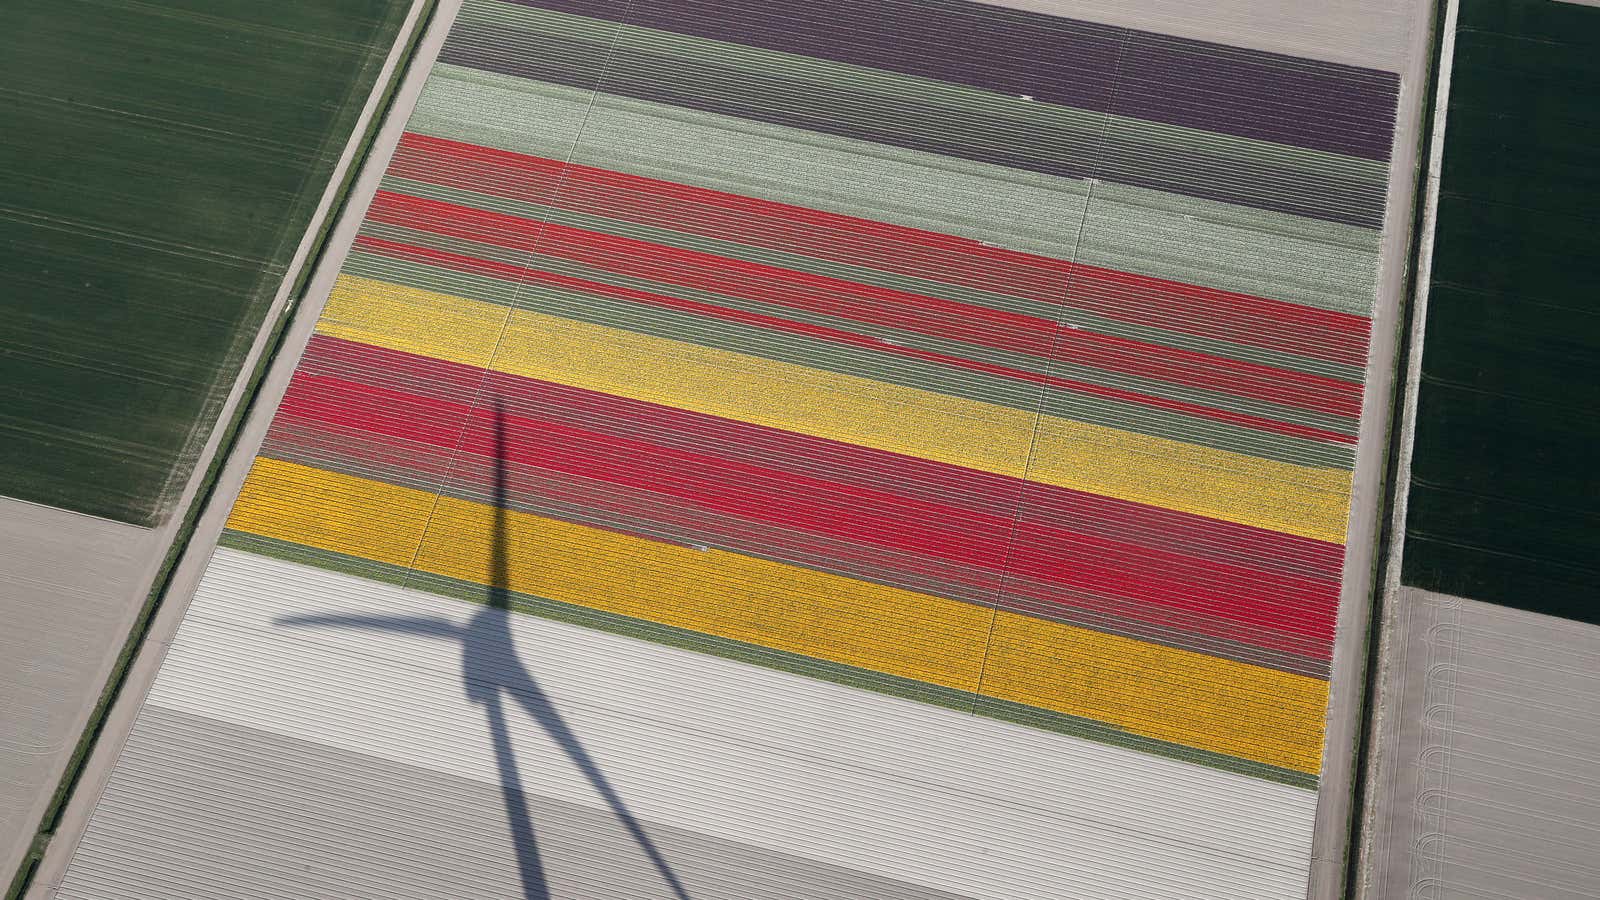 A shadow of a wind turbine over a tulip field in Creil, Netherlands on April 18, 2019.